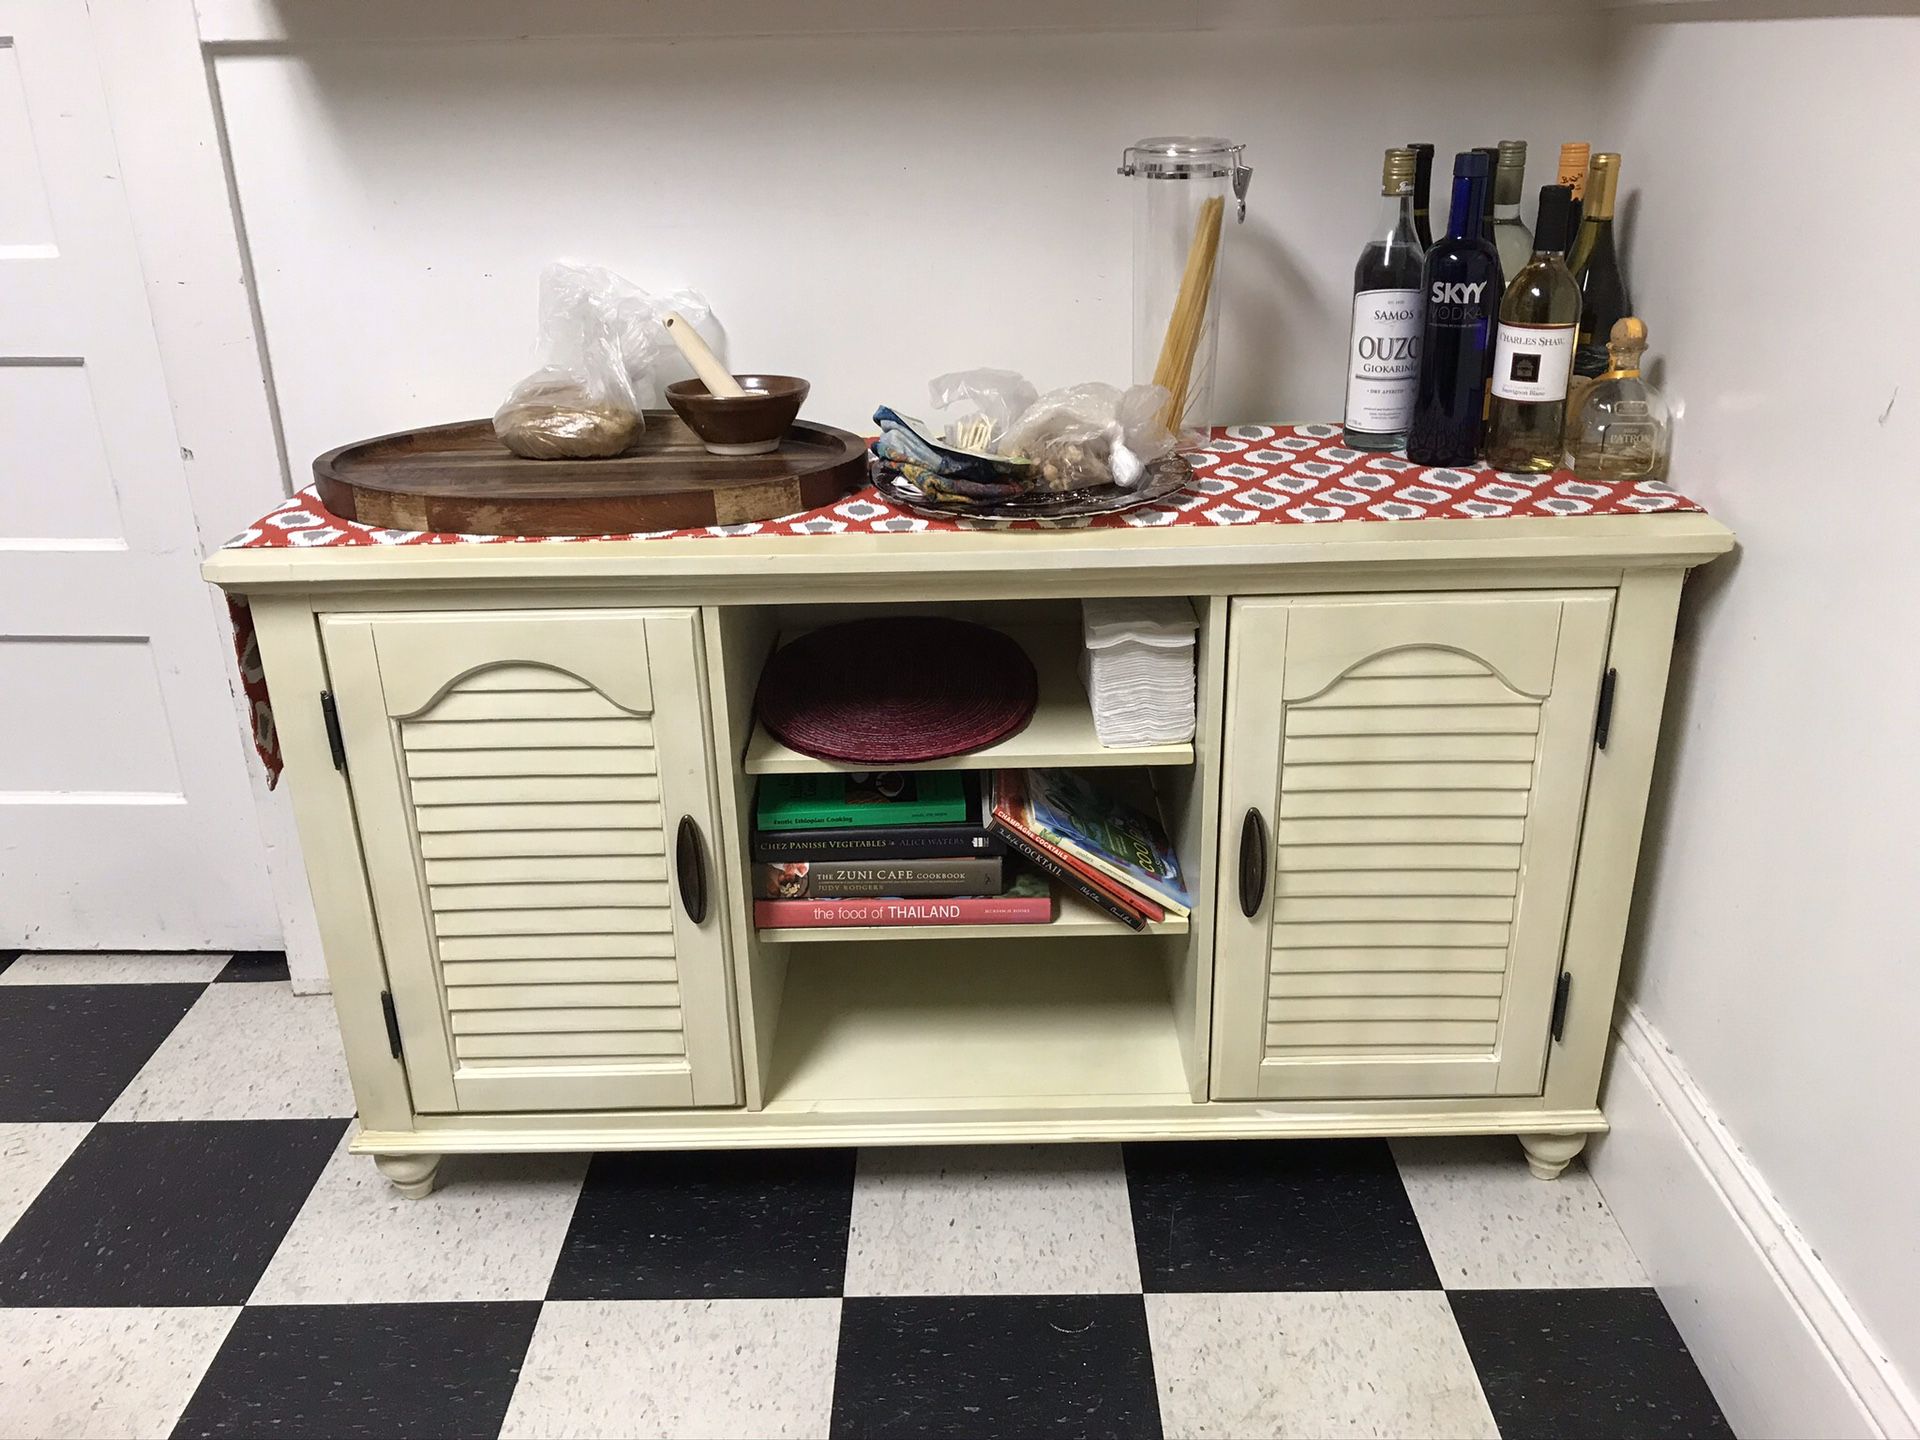 Kitchen side table / cabinet